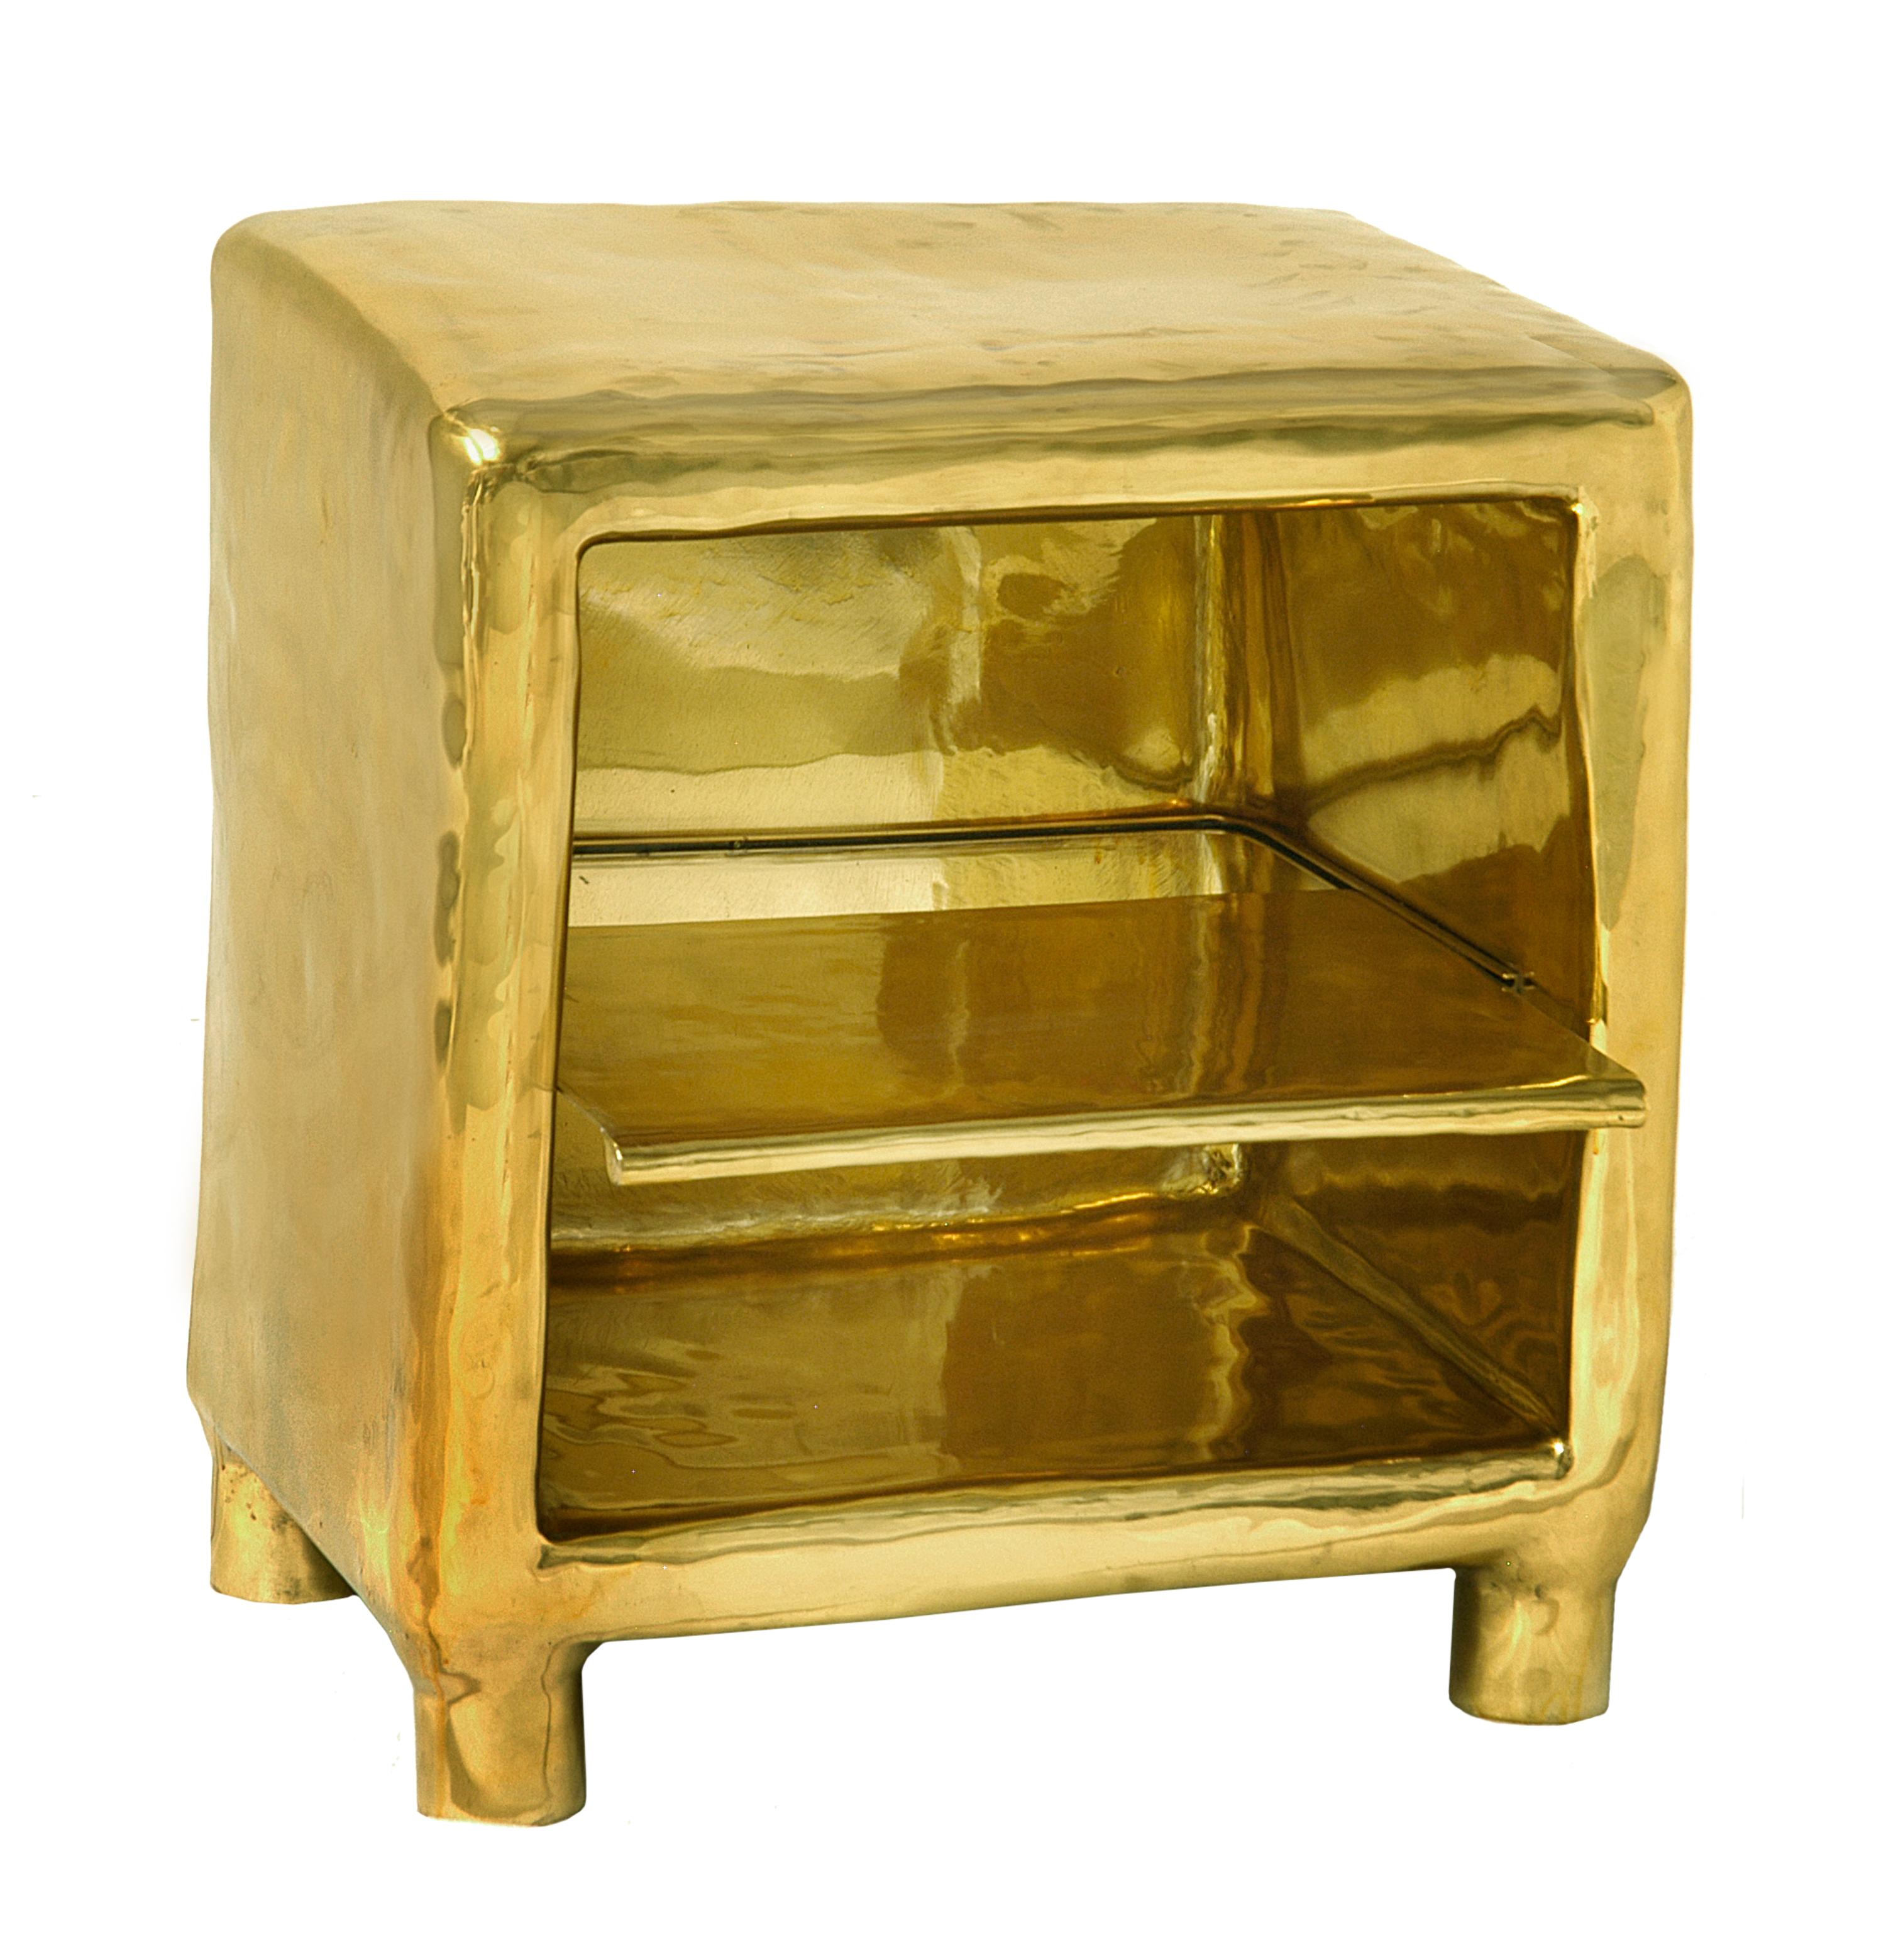 Cheer Bedside Table in Brass by Scarlet Splendour is an opulent bedside table with a shelves for convenience. Beautiful near a sofa too.

The Fools' Gold Collection of amorphous forms, cast in brass, is a tribute to the heritage of Indian metal